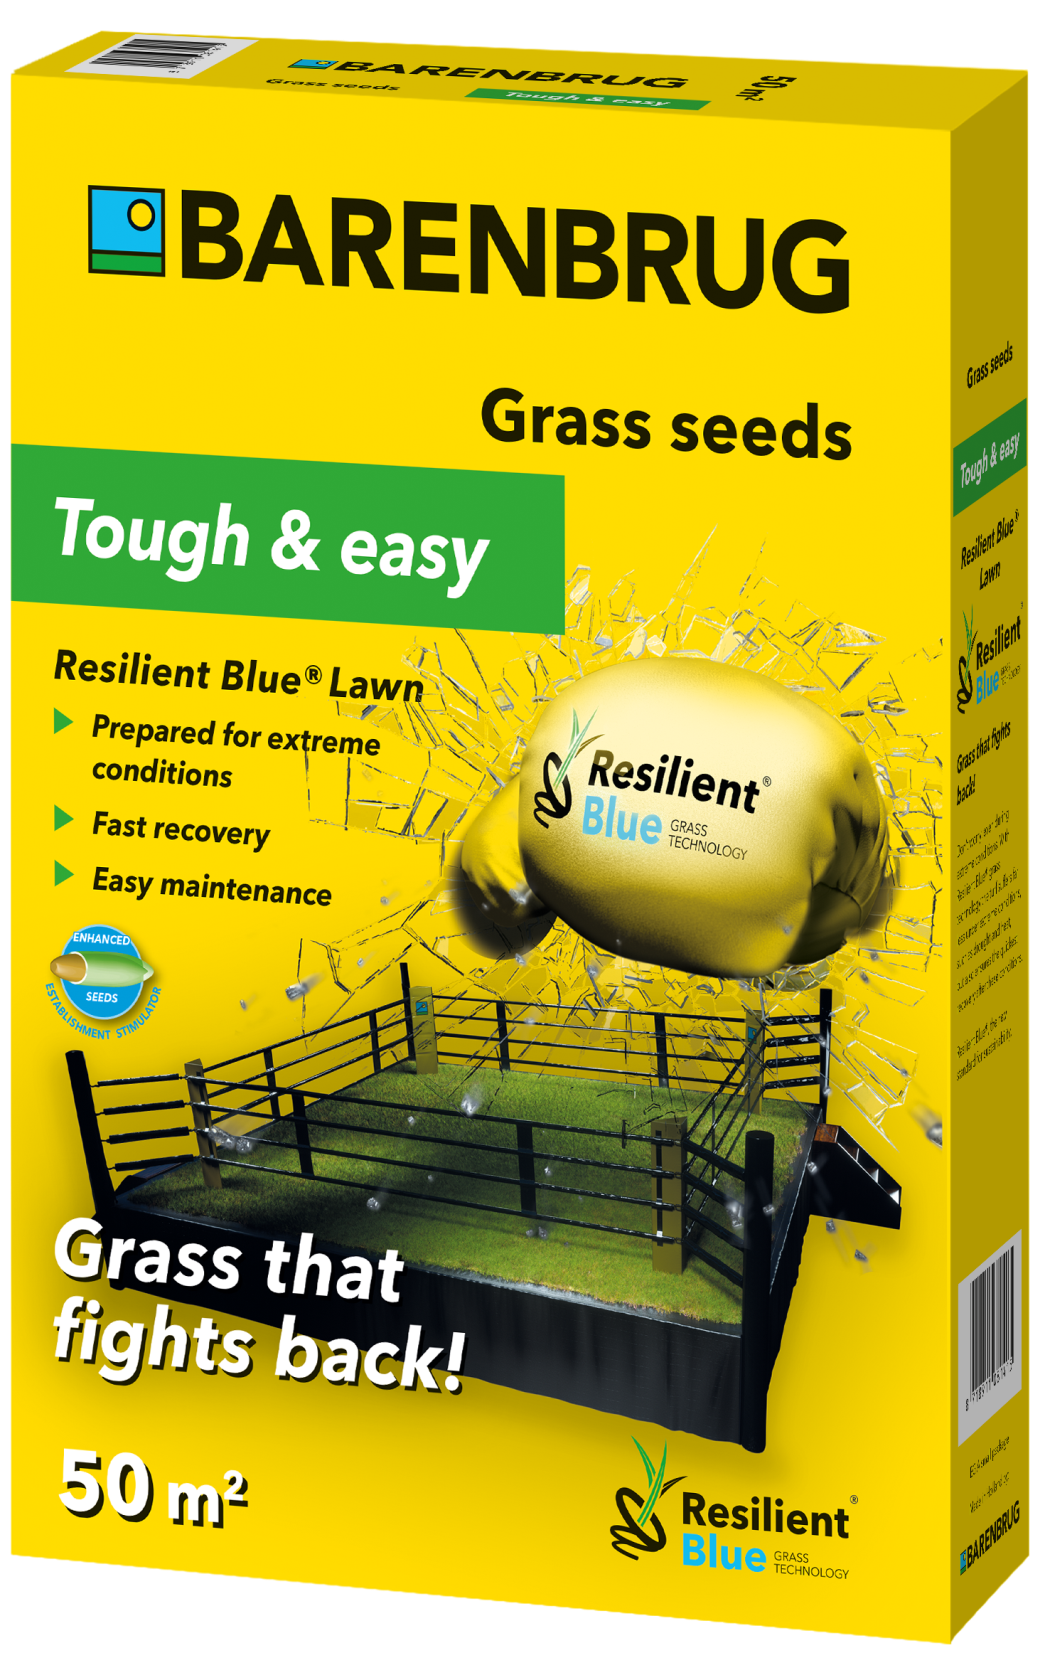 Barenbrug grass seed Resilient Blue Lawn - Grass that fights back - 1kg up to 50m²